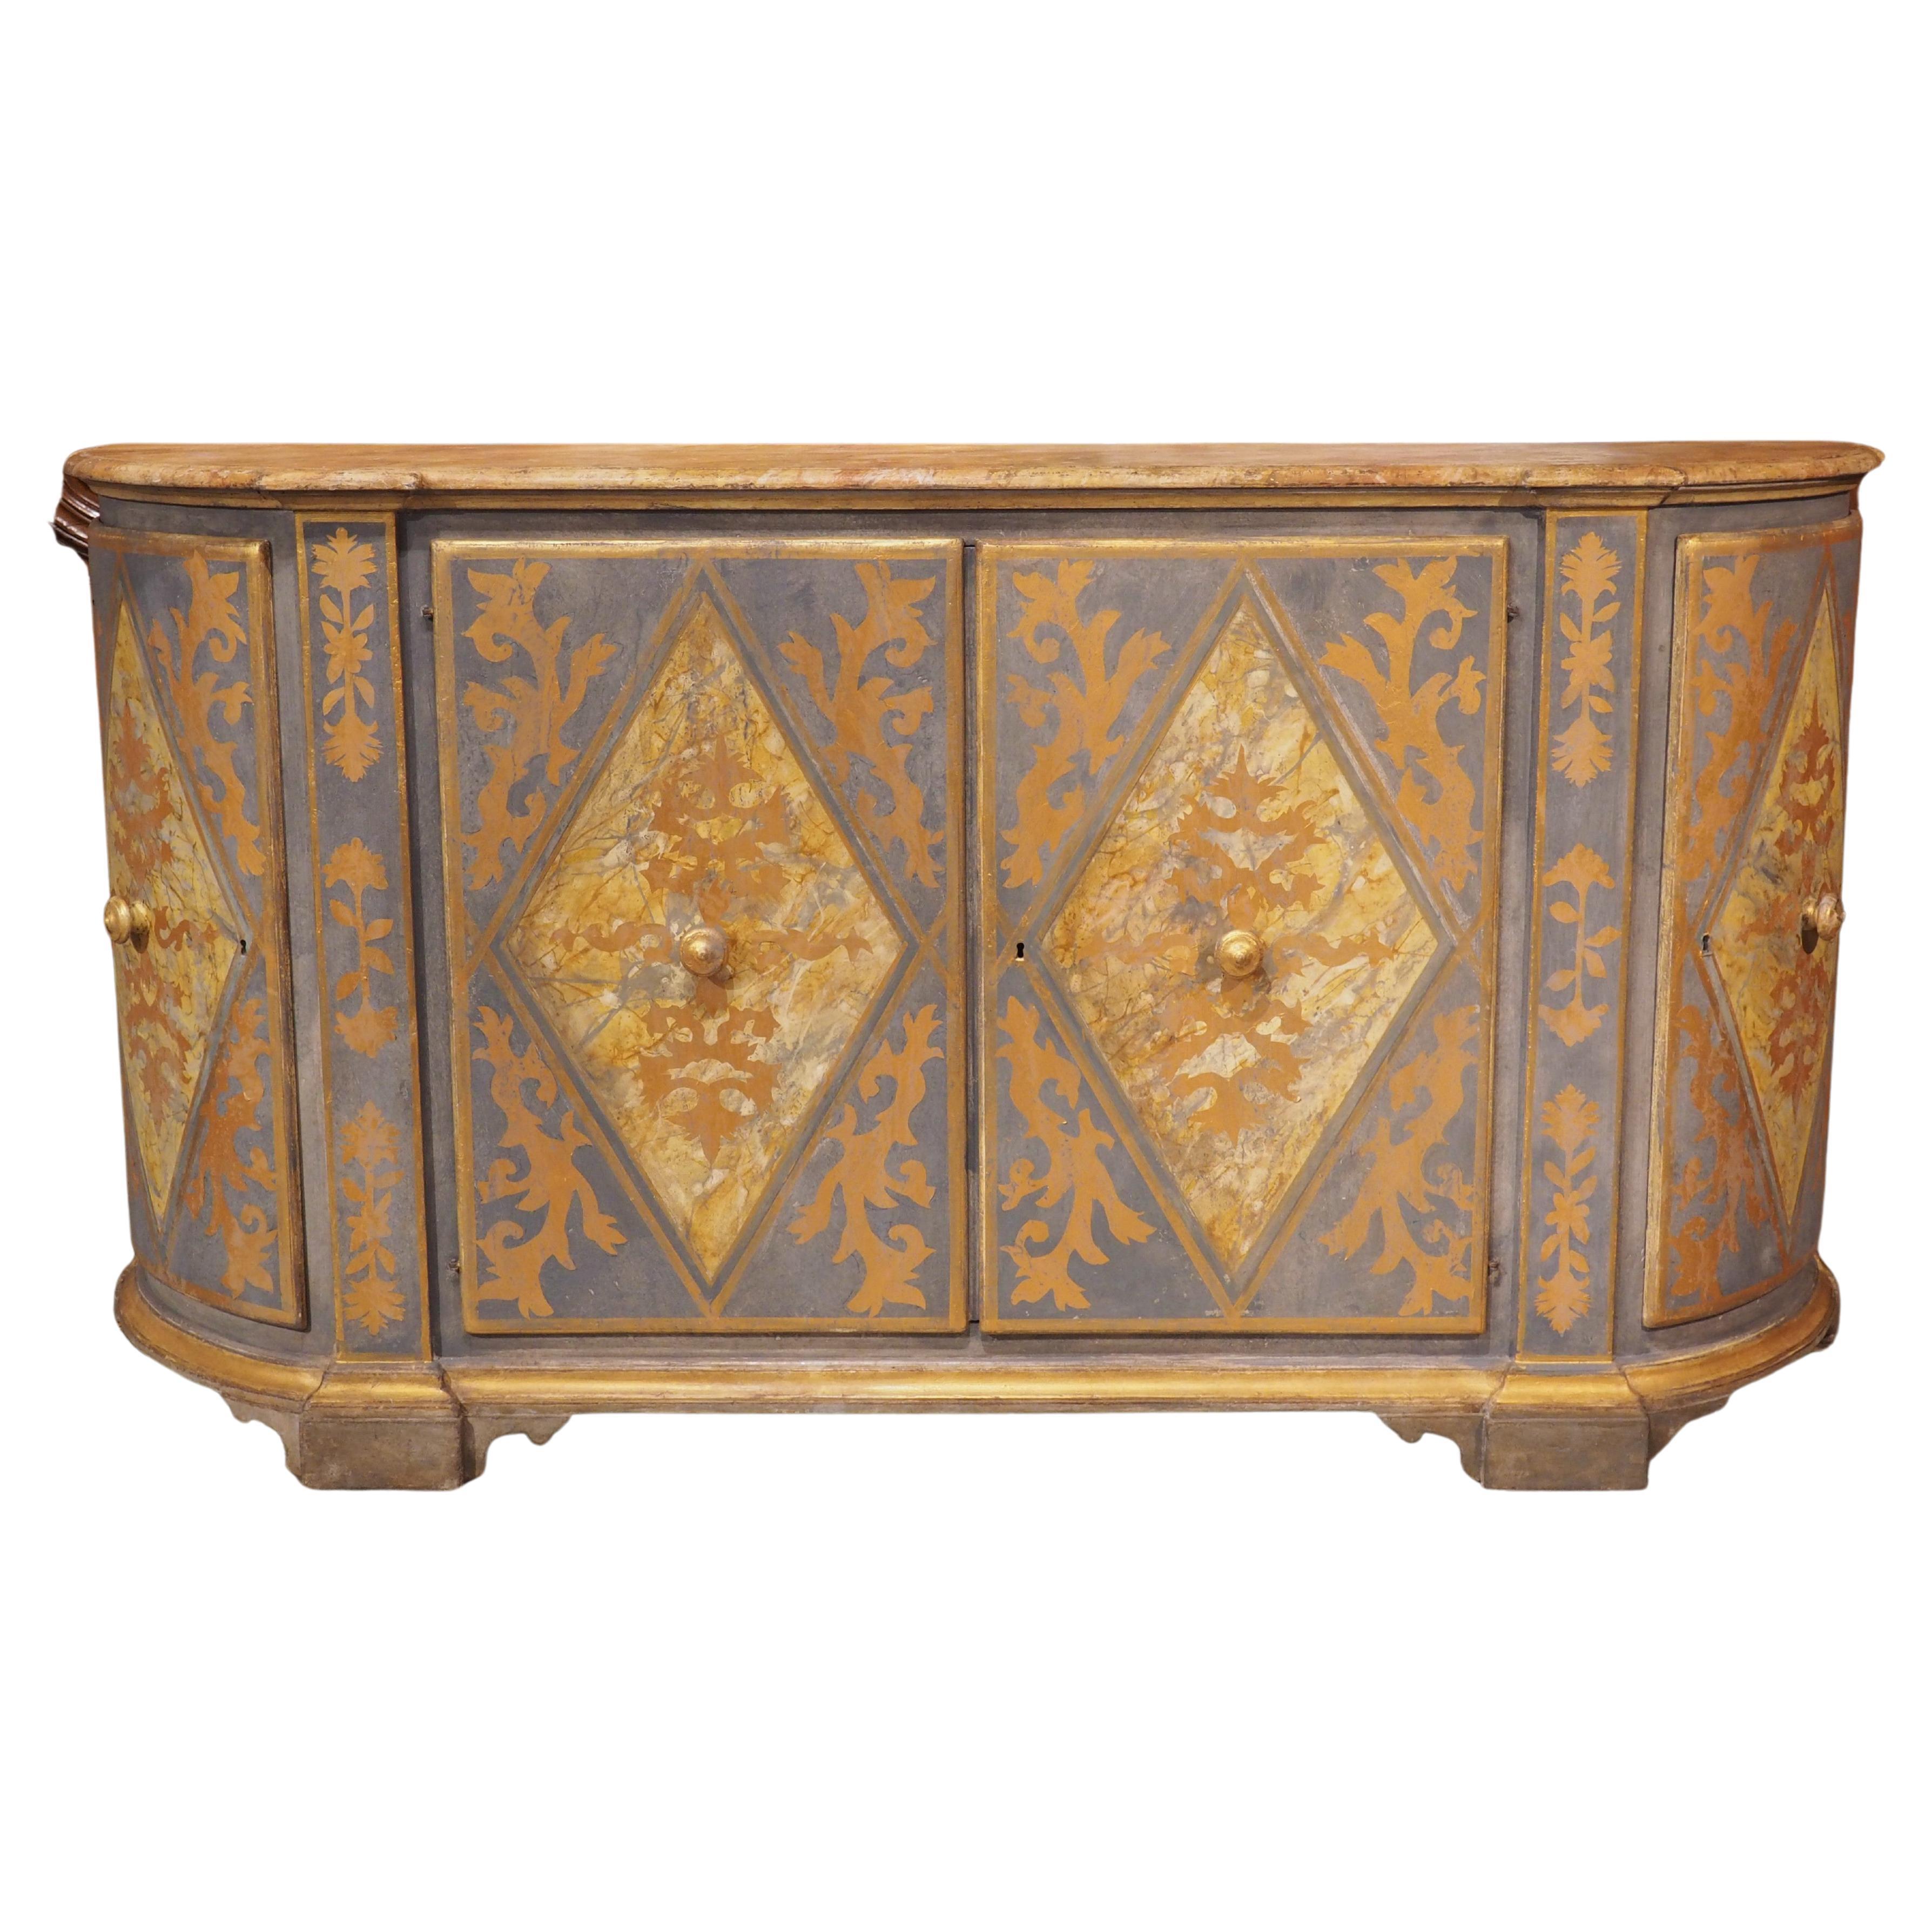 19th Century 4-Door Powder Blue and Gold Painted Credenza from Italy For Sale